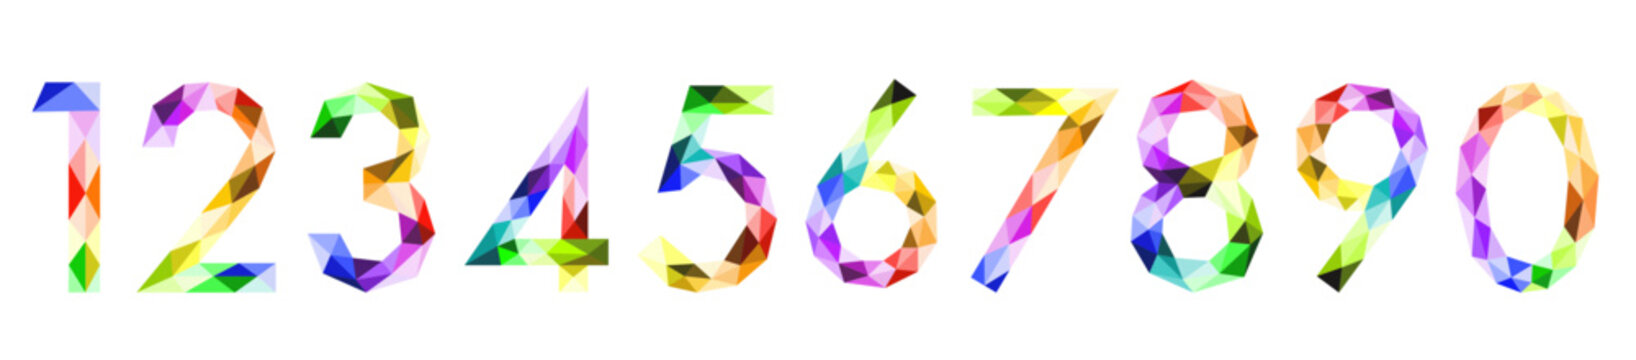 Bright numbers. Numbers of vector creative colored geometric shape.